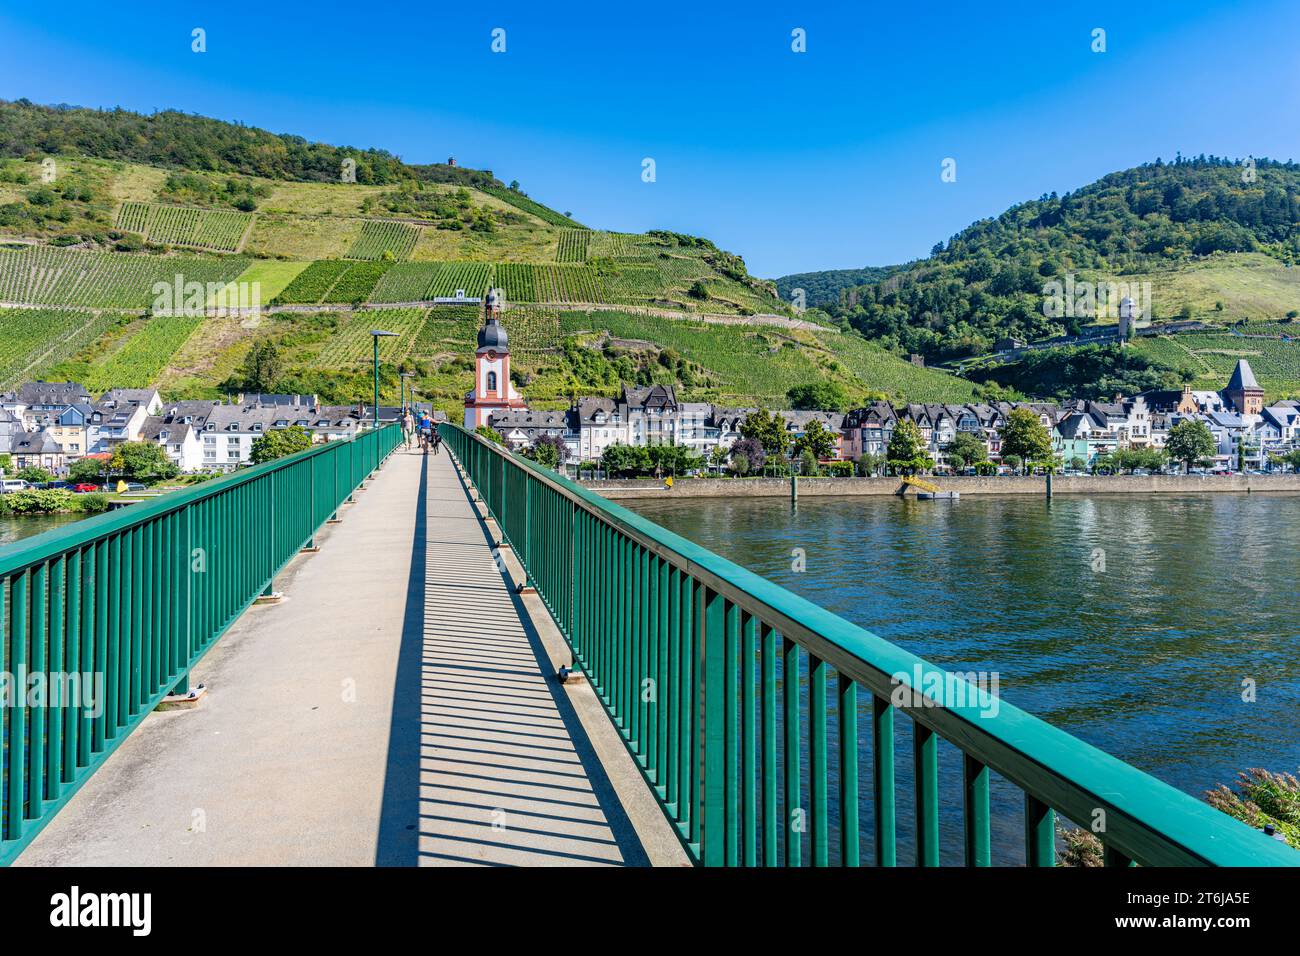 Zell an der Mosel, town with a long history of viticulture at the picturesque Mosel loop at the Zeller Hamm and the famous wine 'Zeller Schwarze Katz', view from the pedestrian bridge, Stock Photo